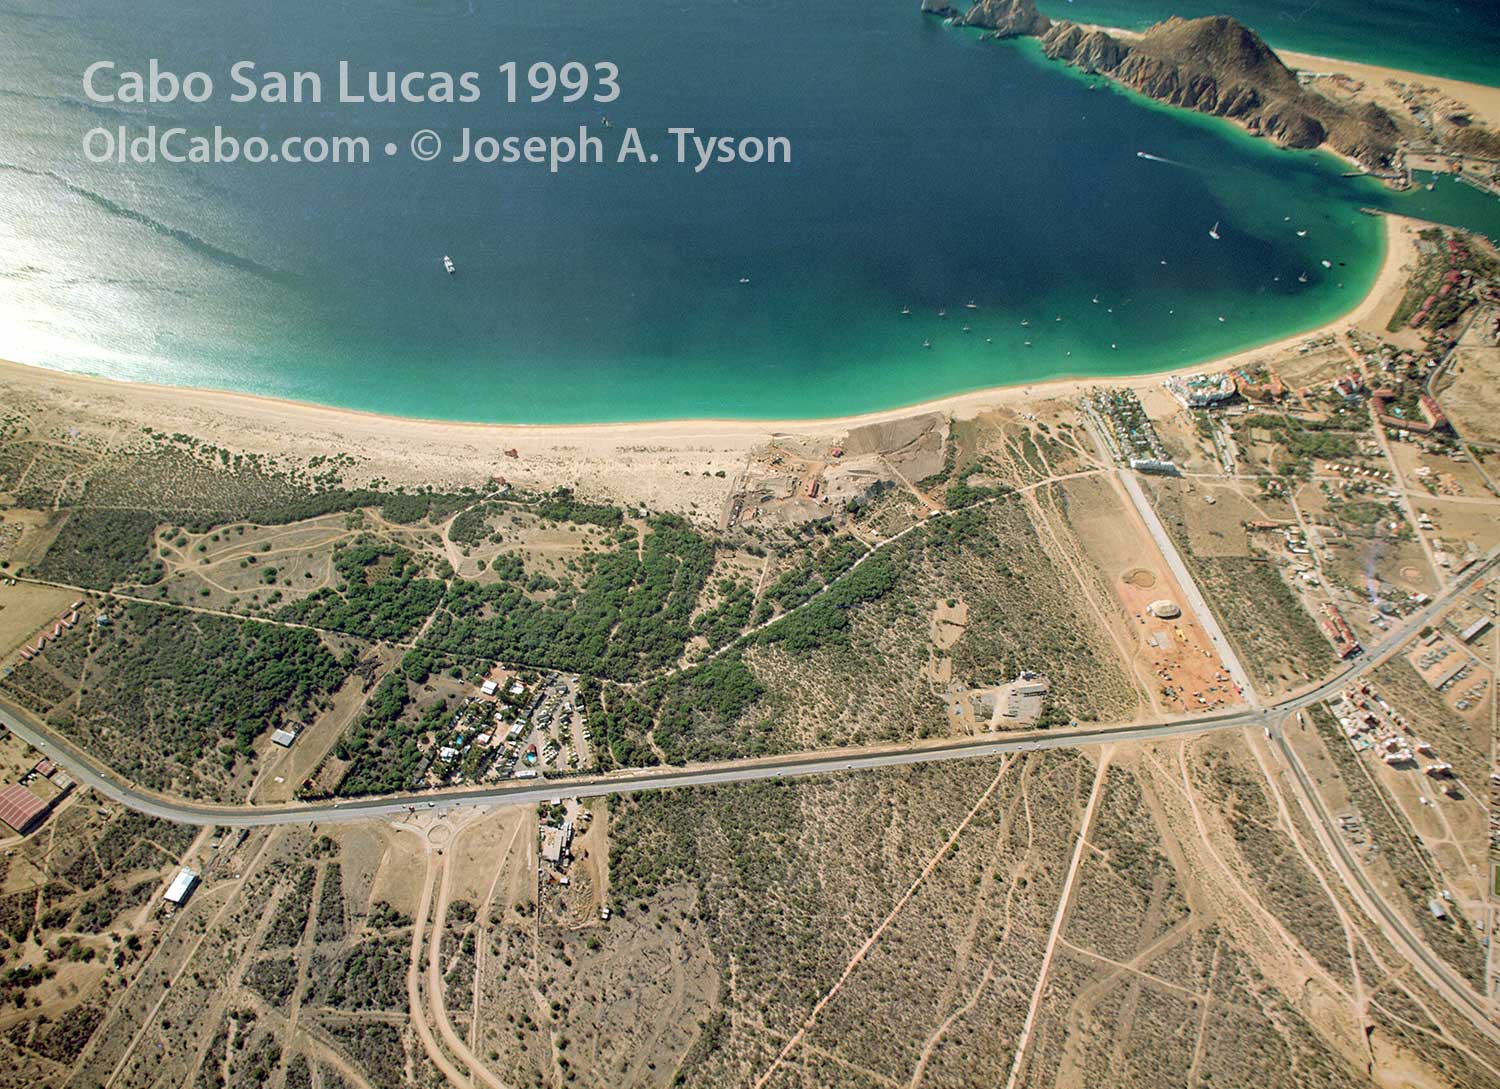 Aerial view of Cabo San Lucas Bay and Medano Beach taken in 1993. Photo by Joseph A. Tyson.